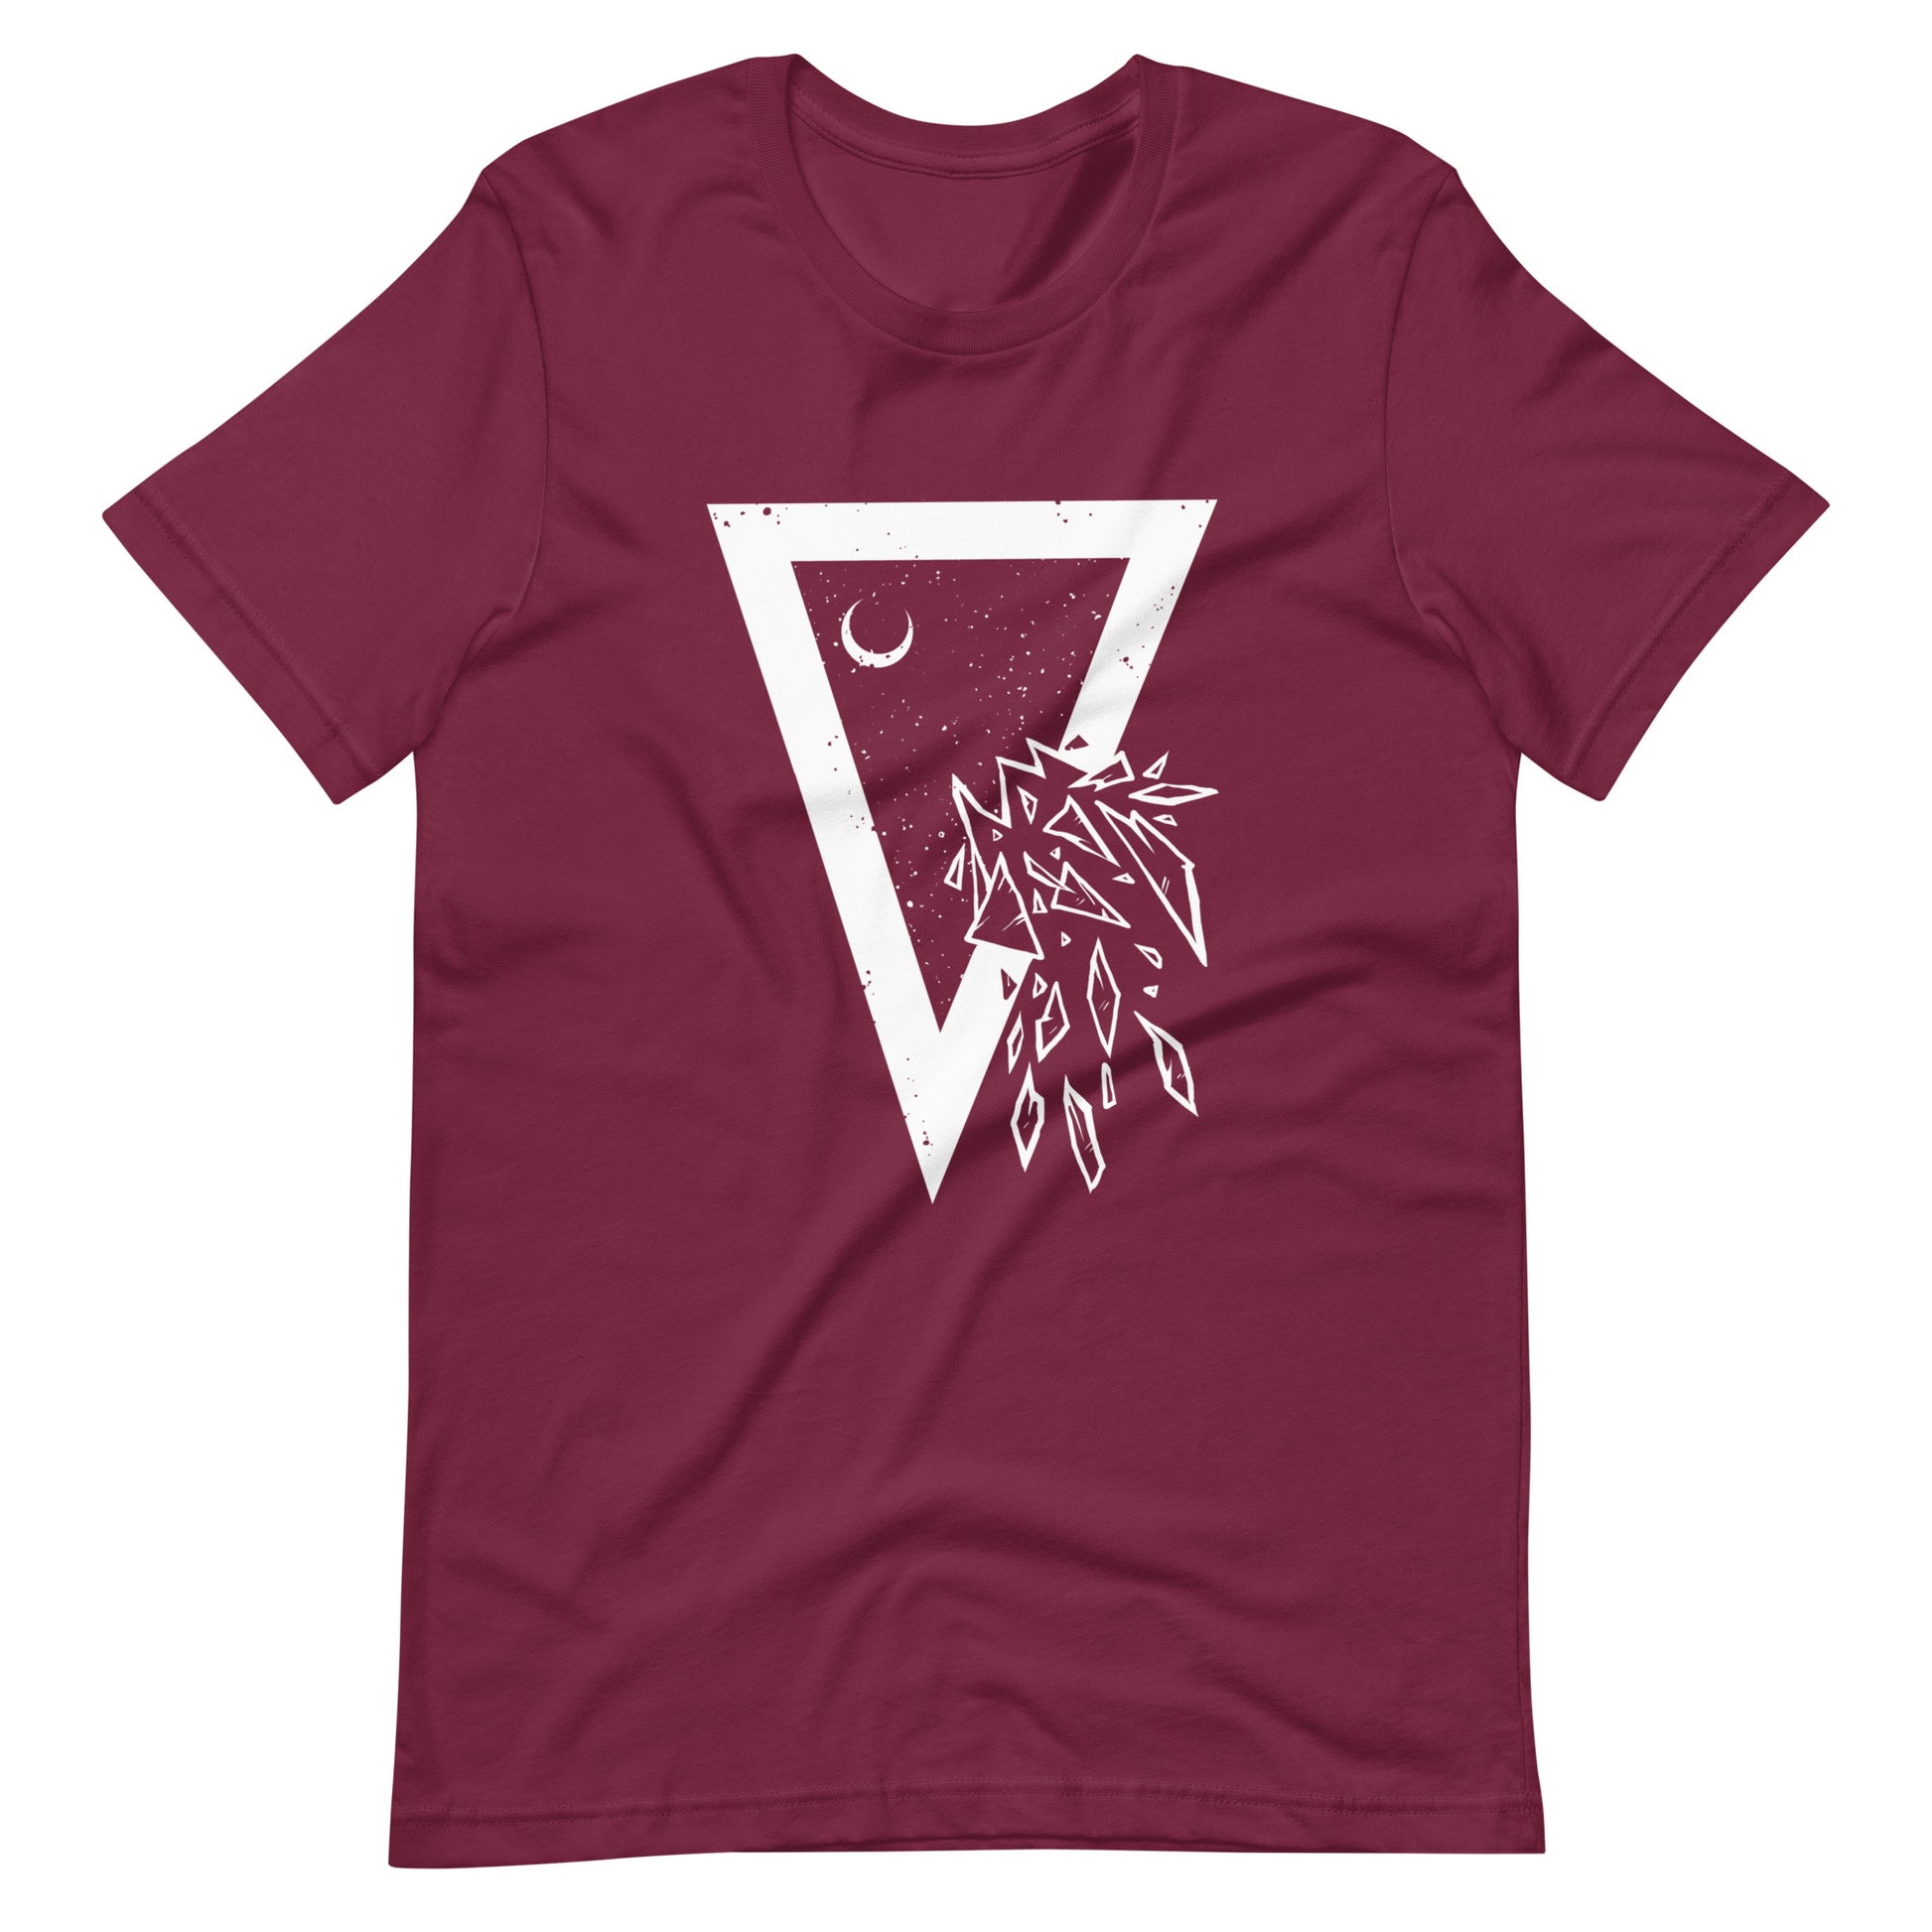 Glass Ceiling - Men's t-shirt - Maroon Front